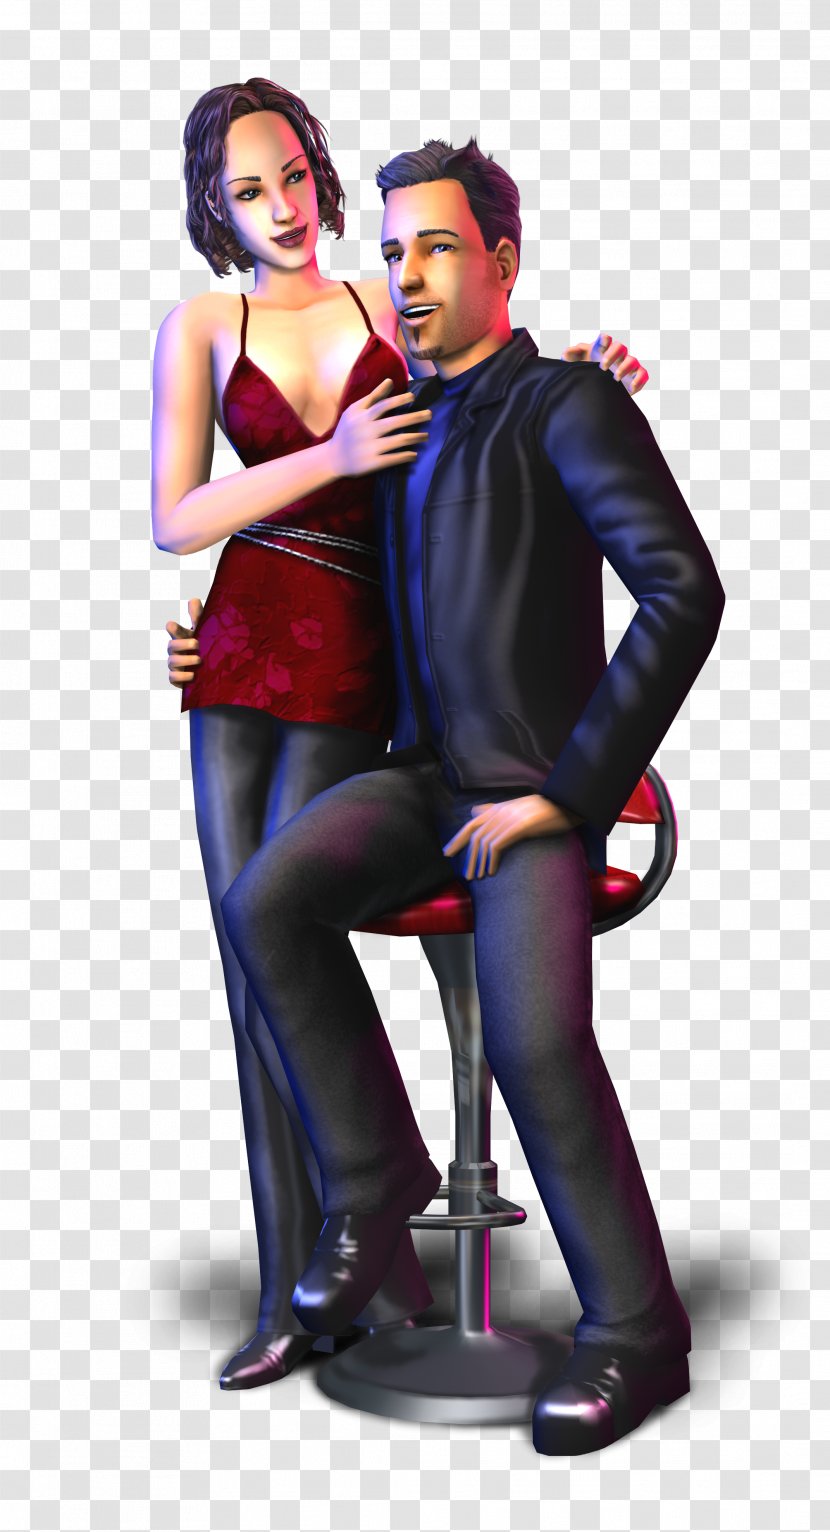 The Sims 2: Nightlife Sims: Hot Date 3 4 Pets - Standing - Download Transparent PNG